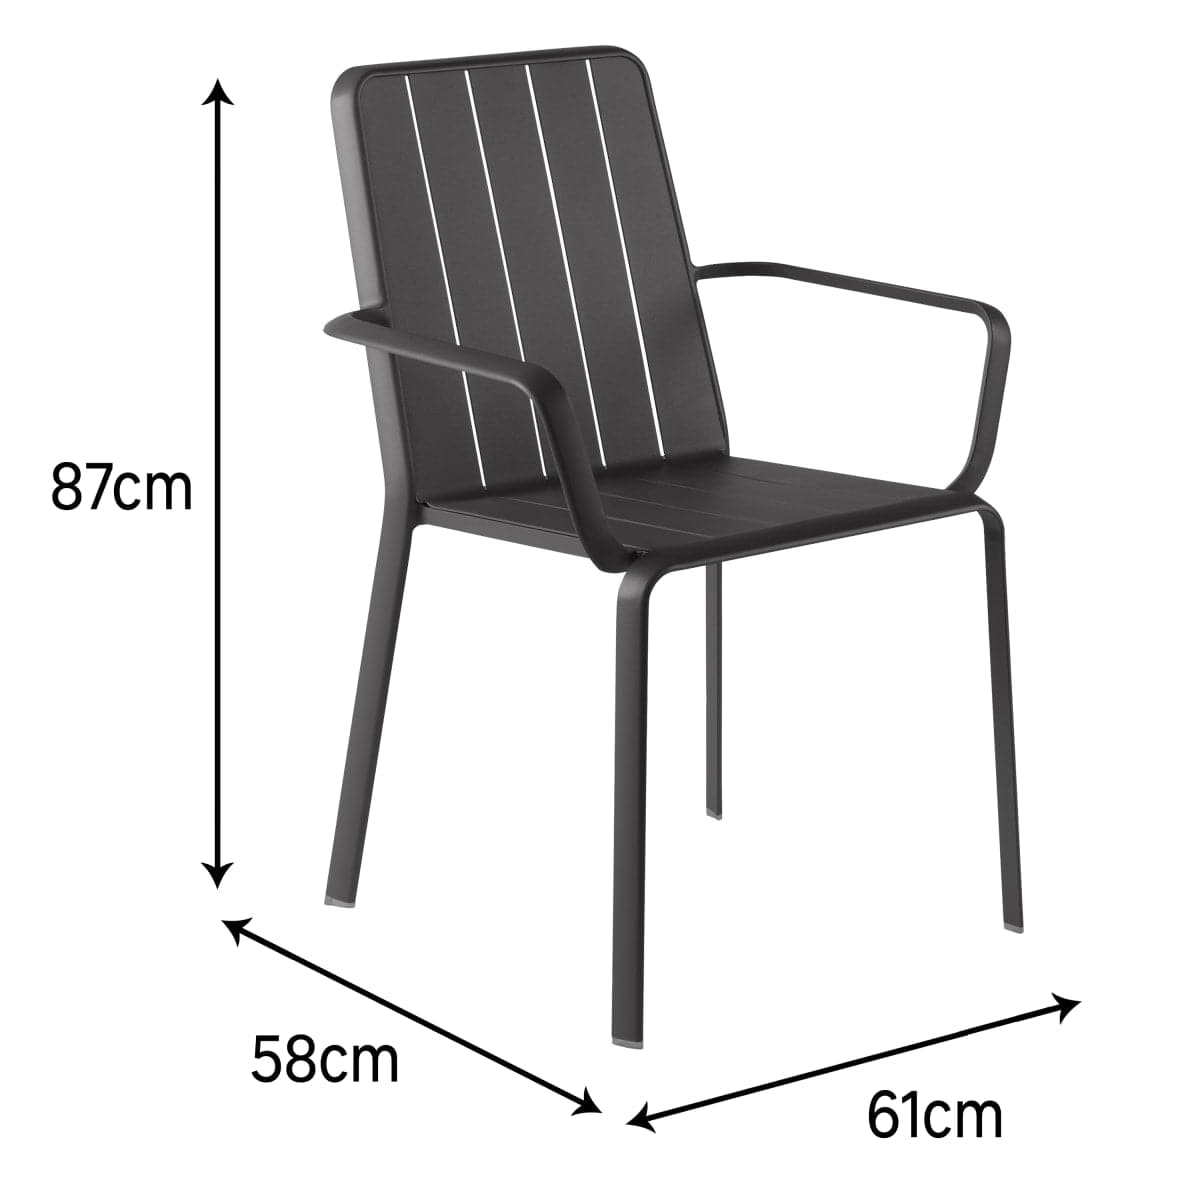 IDAHO NATERIAL ANTHRACITE ALUMINIUM ARMCHAIR WITH ARMRESTS - best price from Maltashopper.com BR500015315